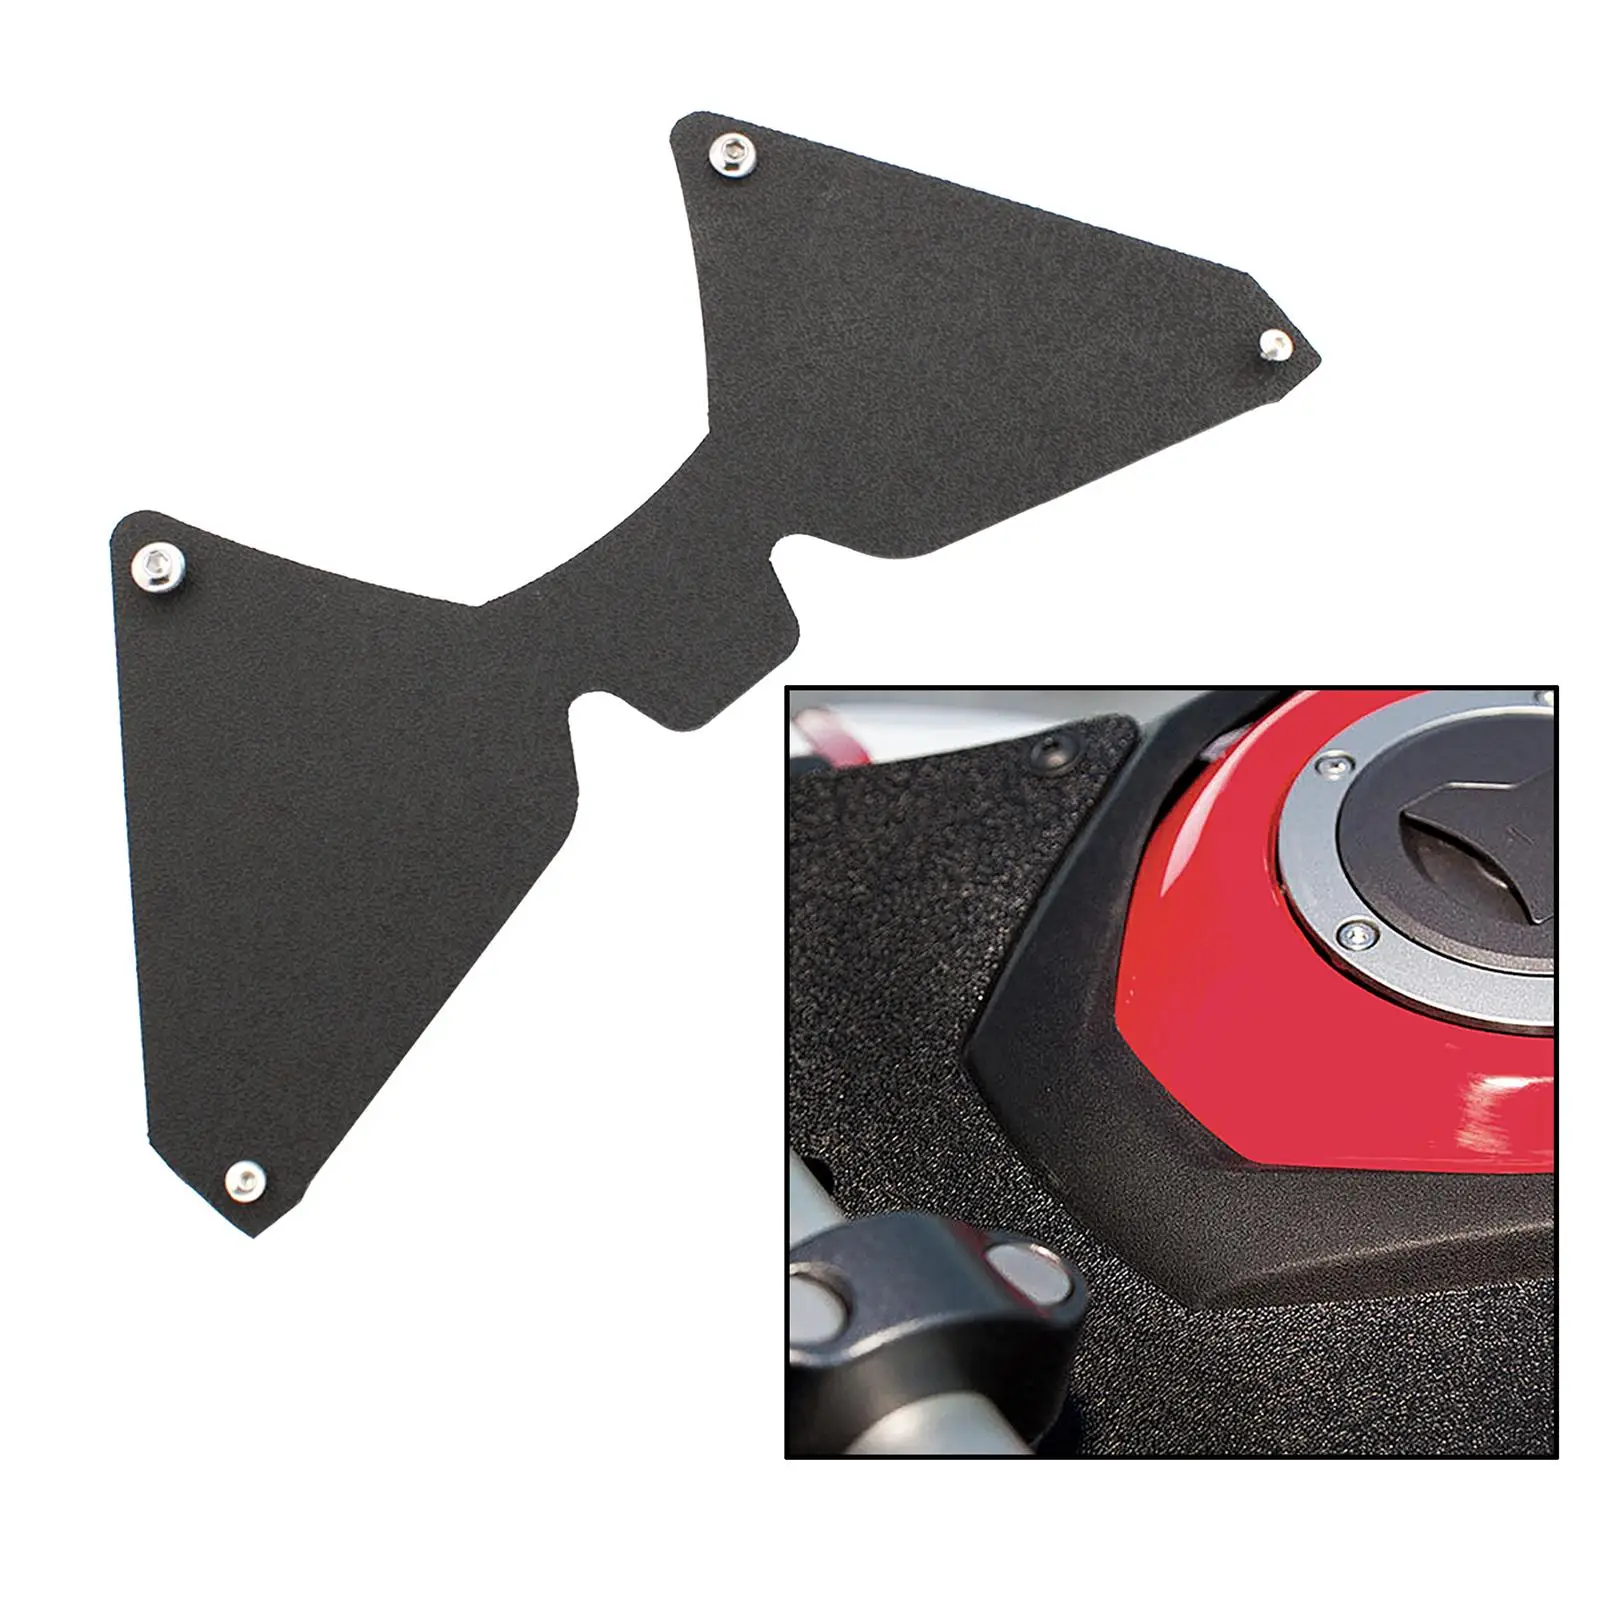 New Updraft  Deflector Front Air Dam Wind Deflector Shield for Honda CRF1000L Africa Twin Accessories